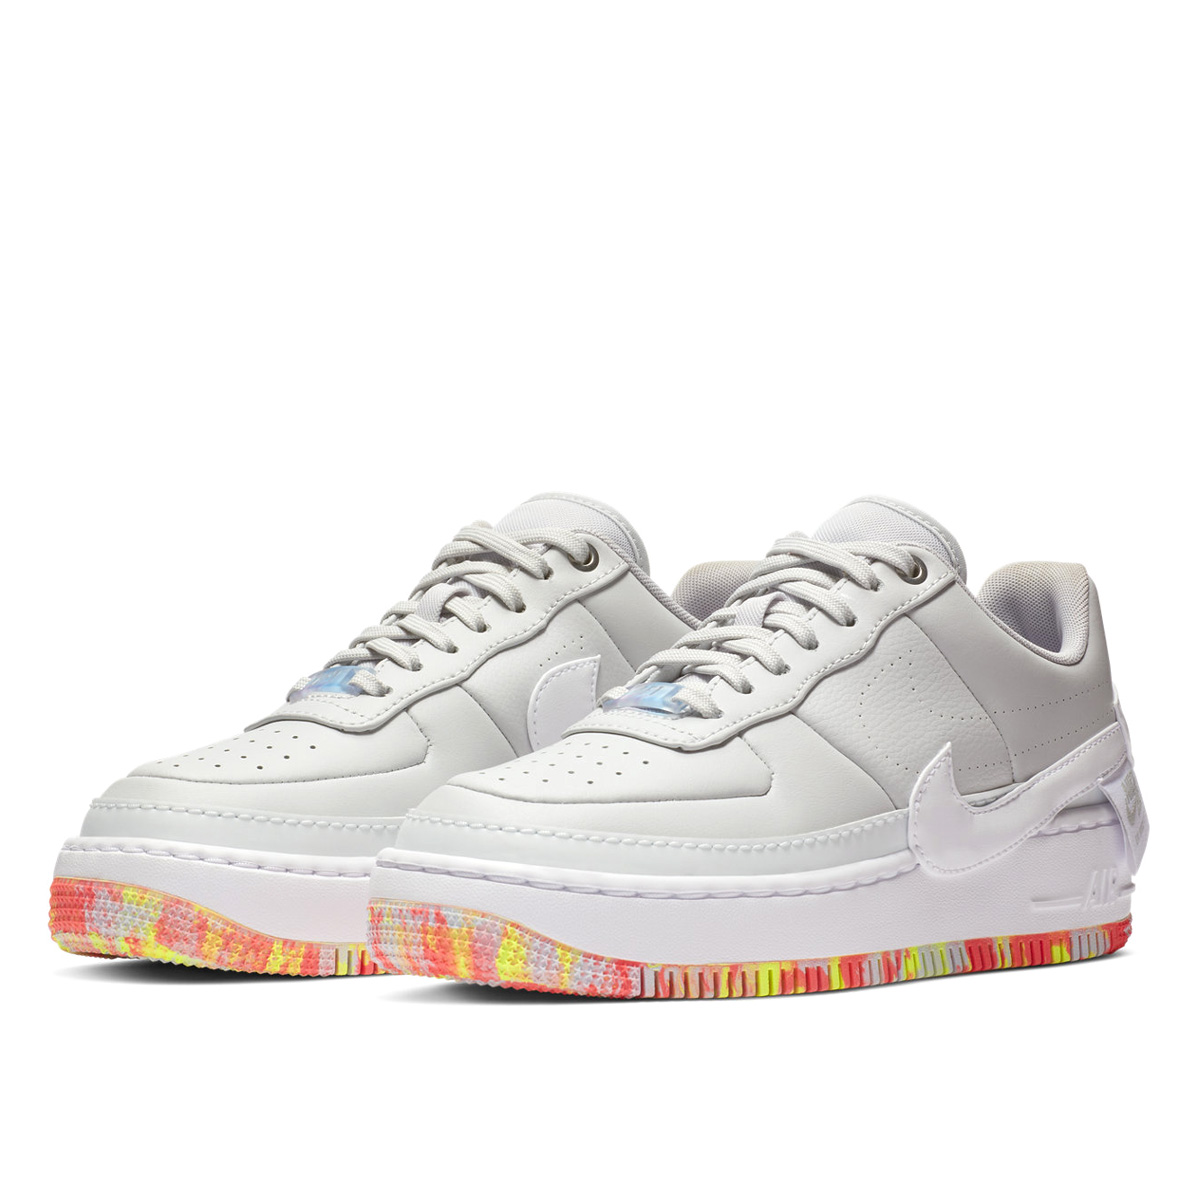 nike air force one jester pink